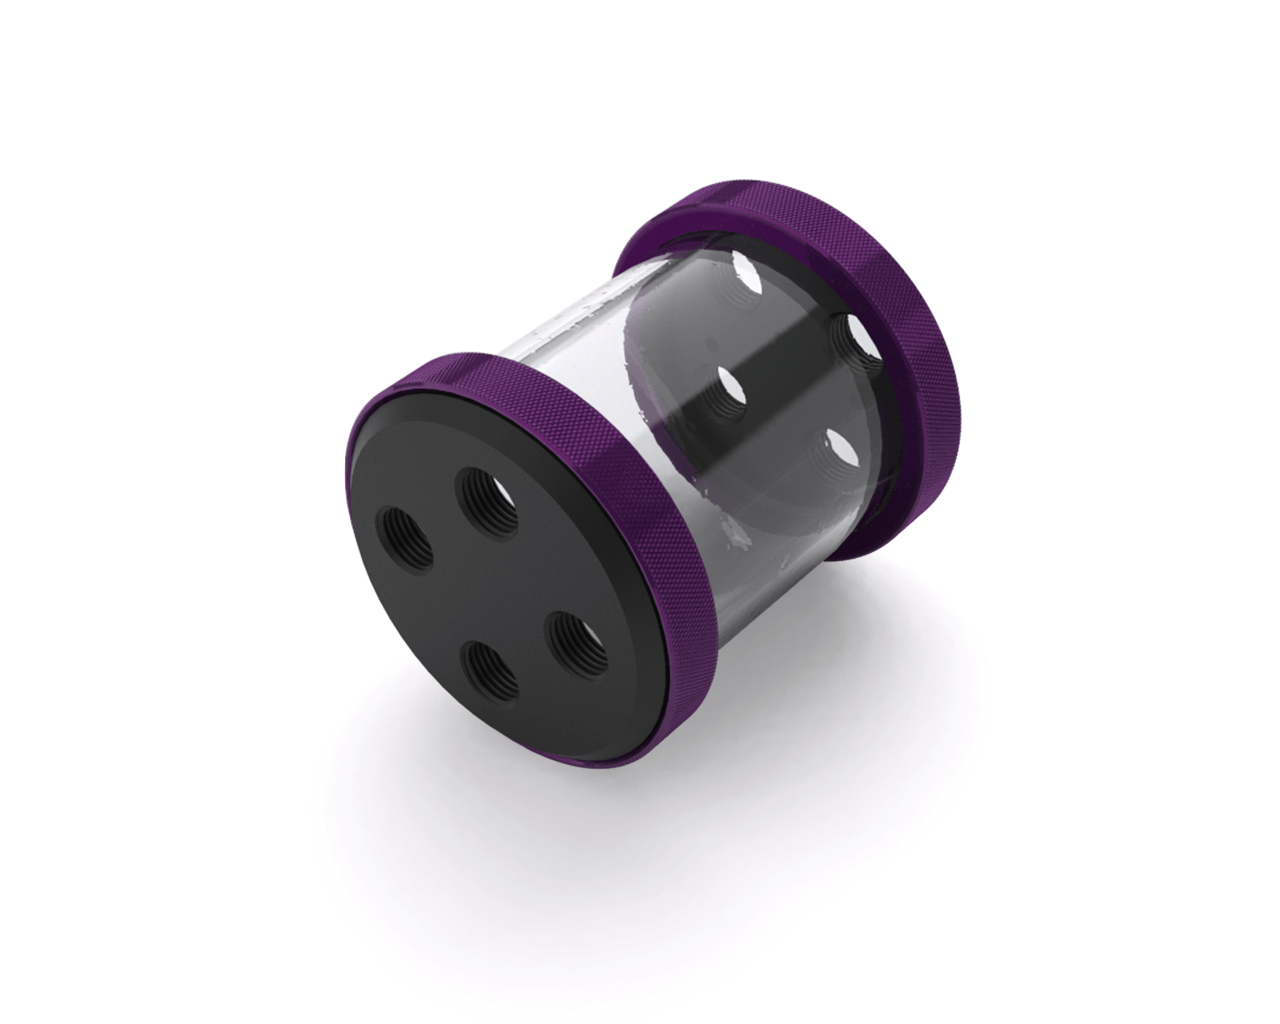 PrimoChill CTR Low Profile Phase II Reservoir - Black POM - 80mm - PrimoChill - KEEPING IT COOL Candy Purple